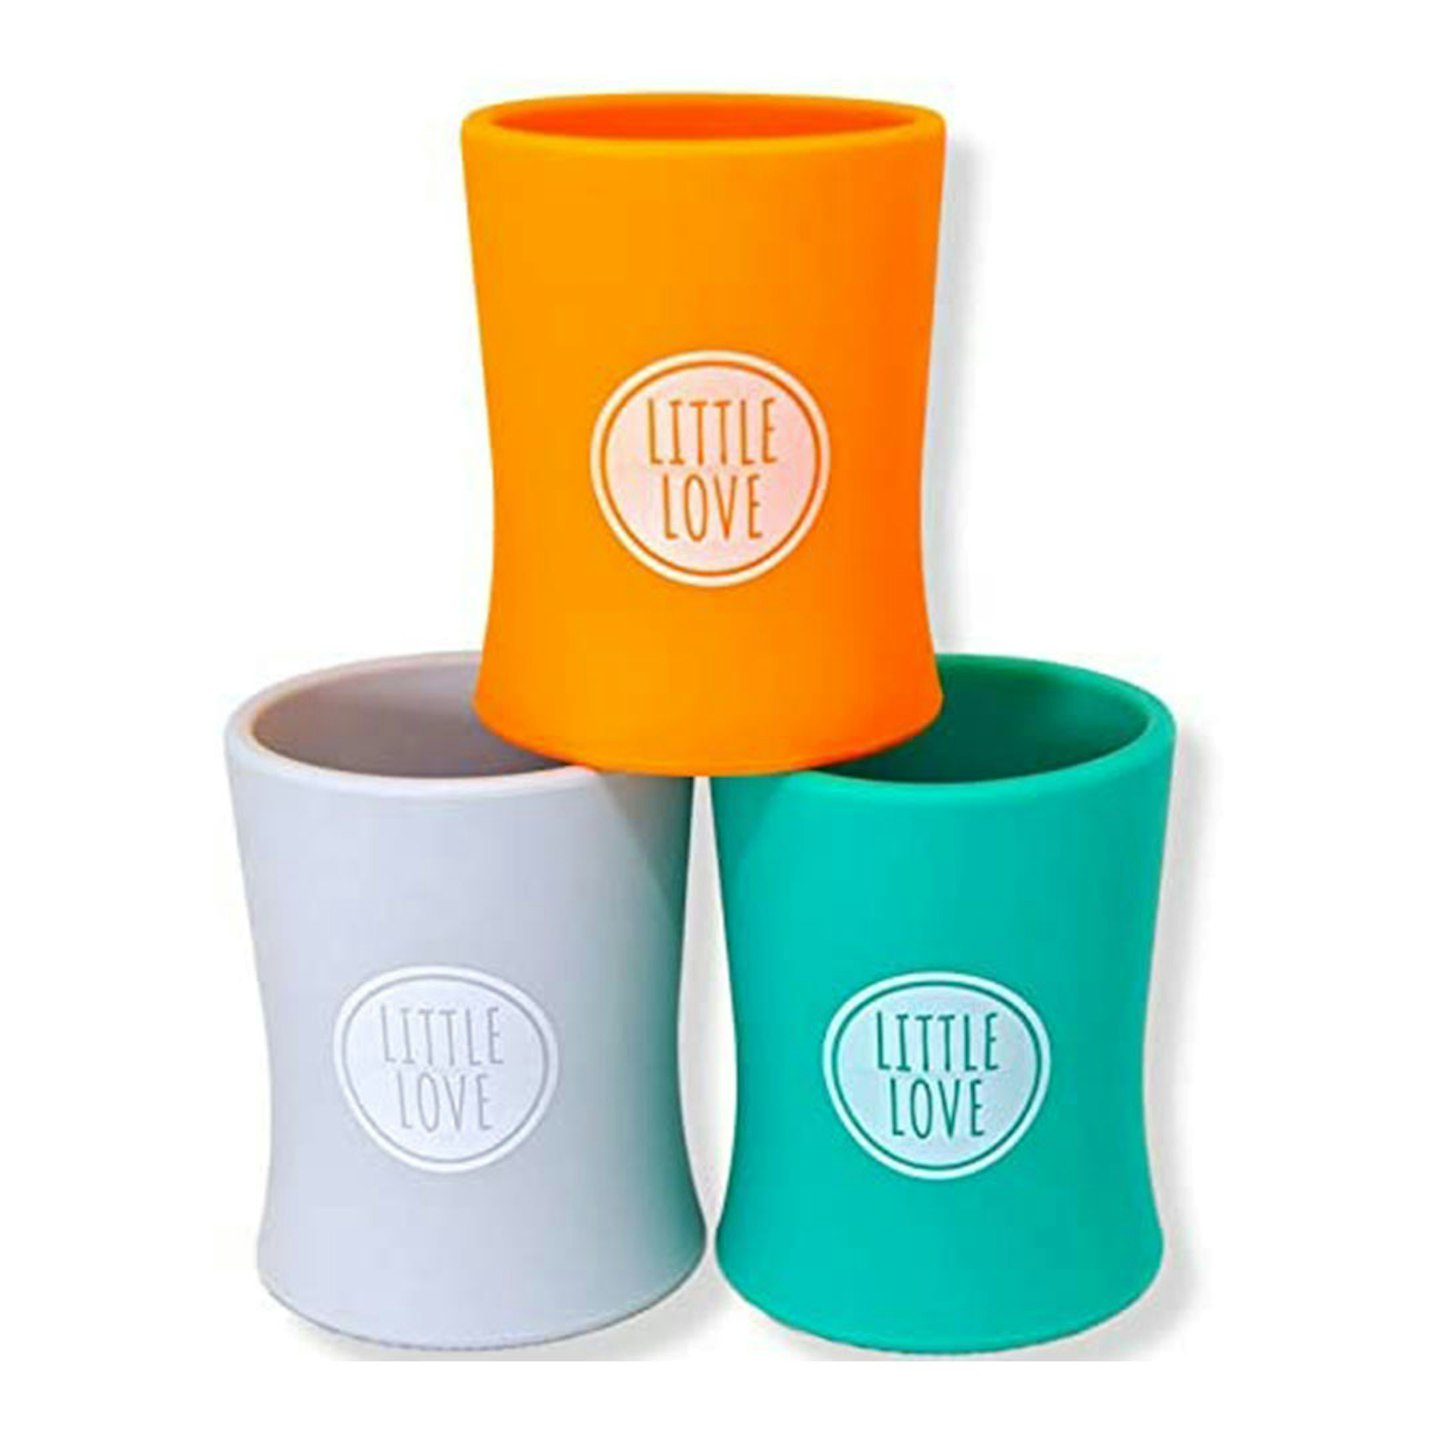 The best kids' beakers and cups for independent drinking